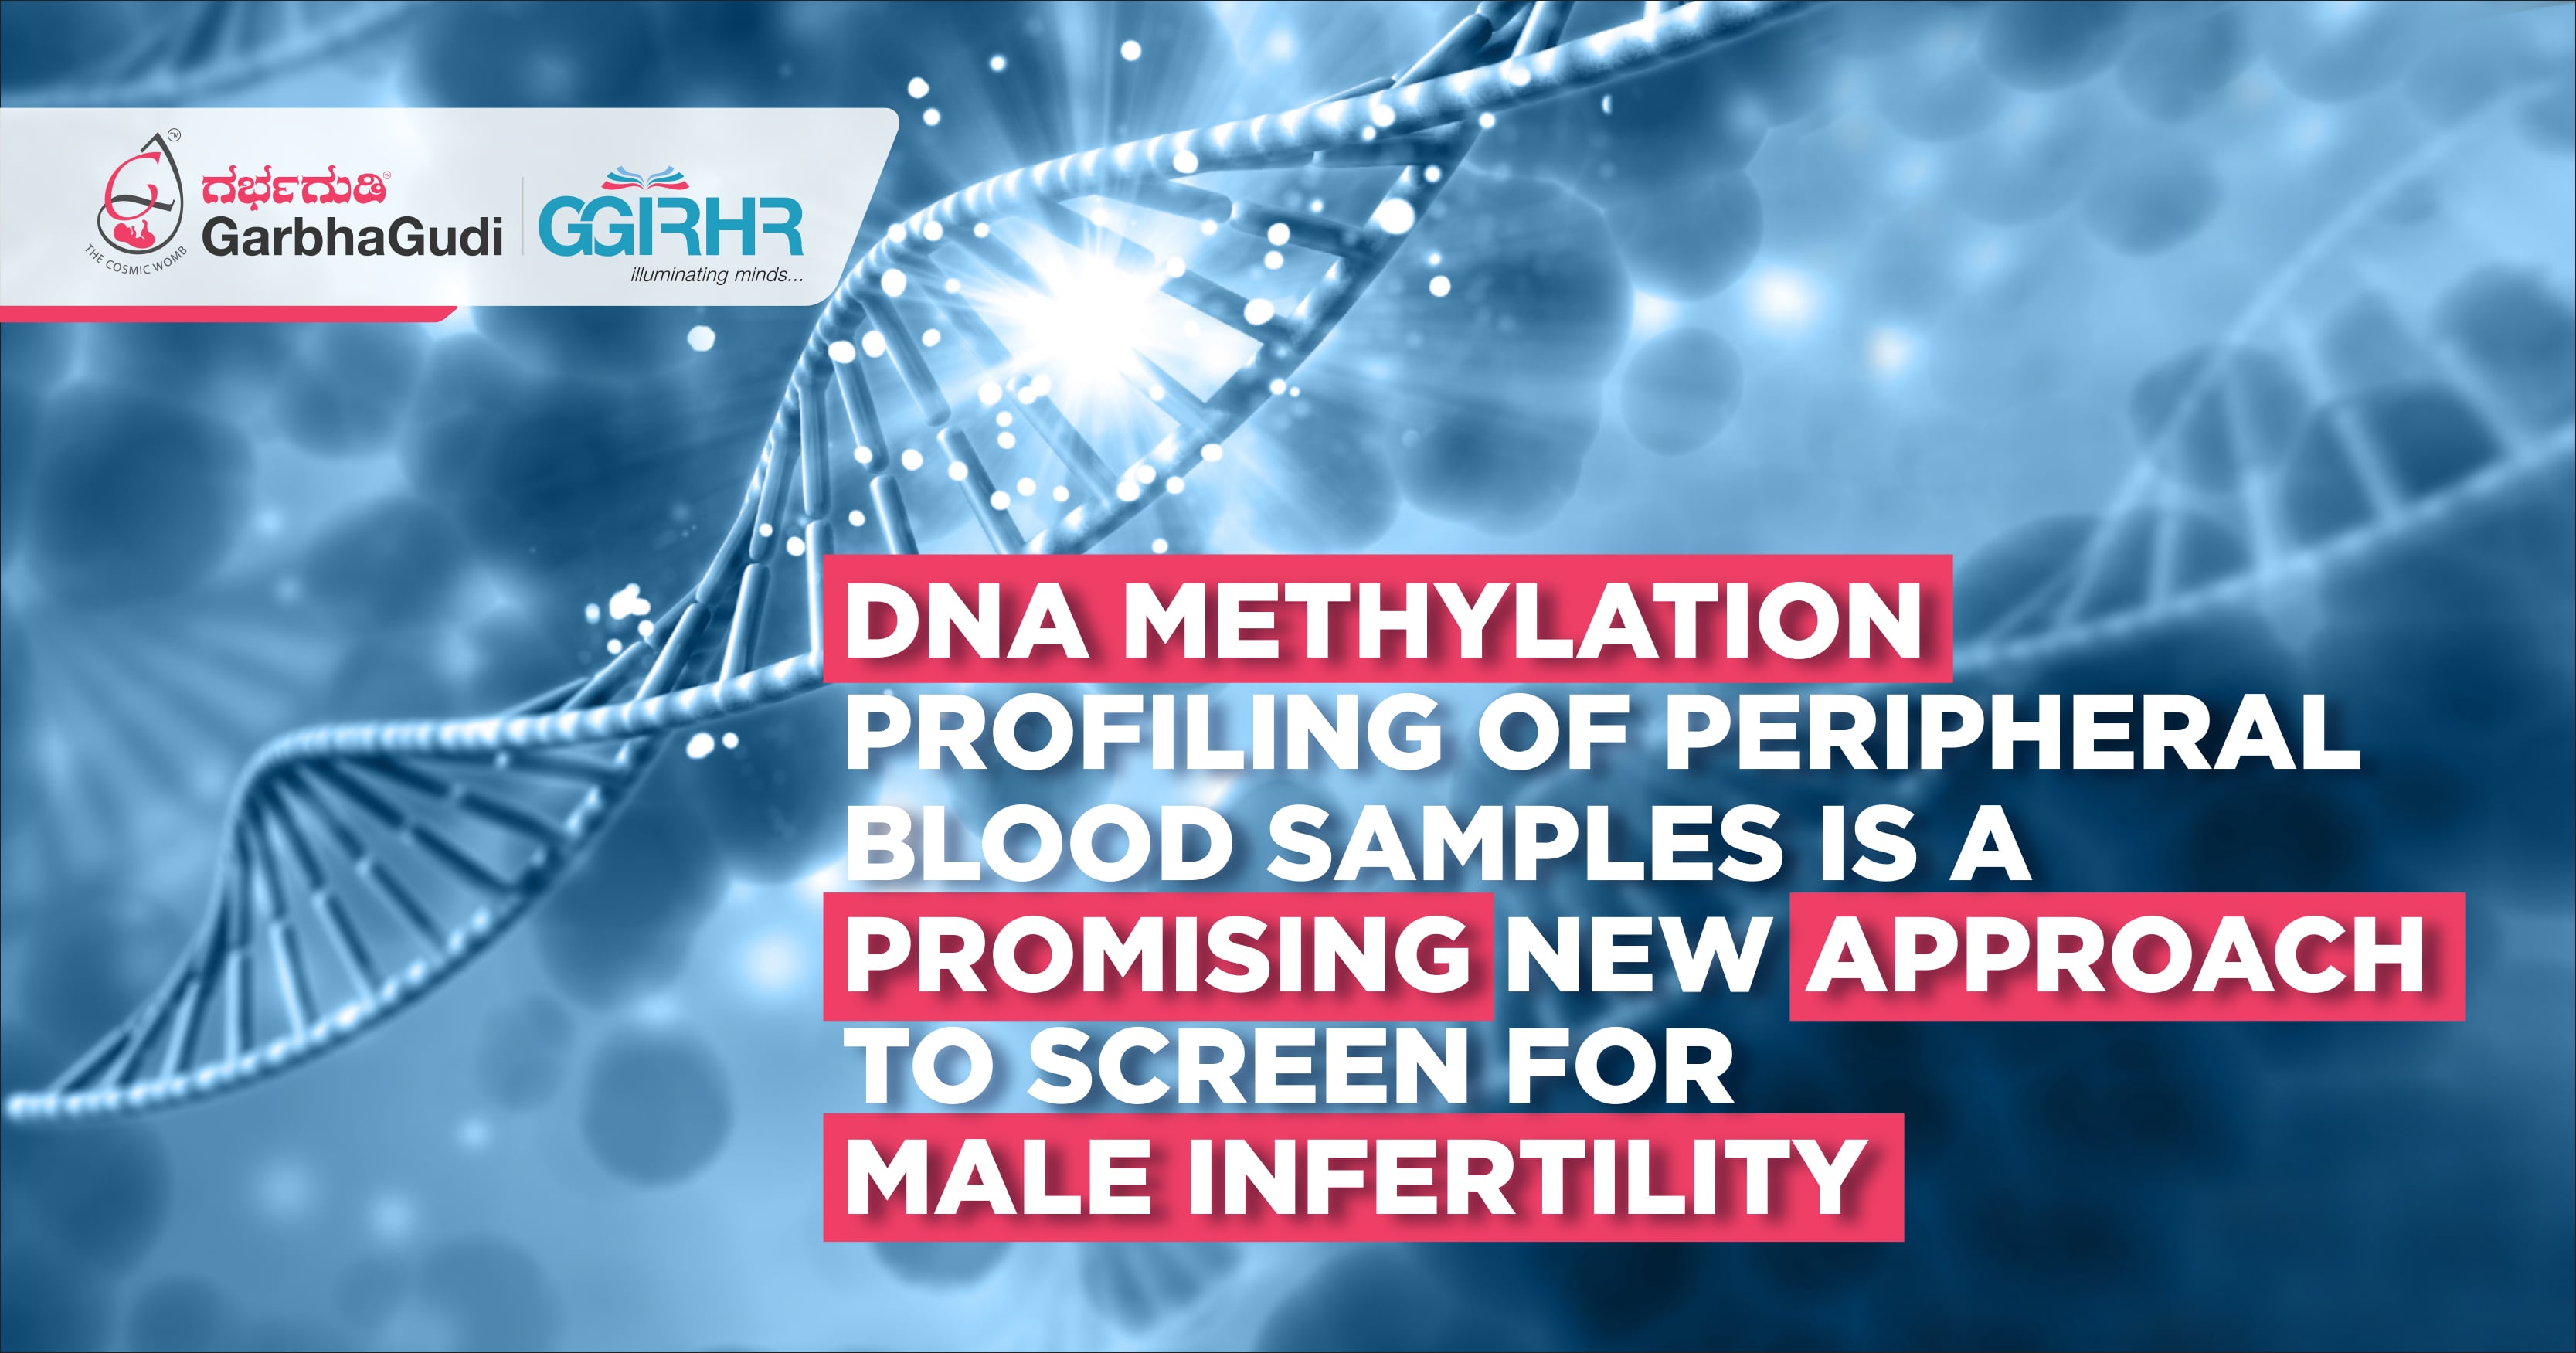 DNA Methylation Profiling - A Promising New Approach to Screen Male Infertility